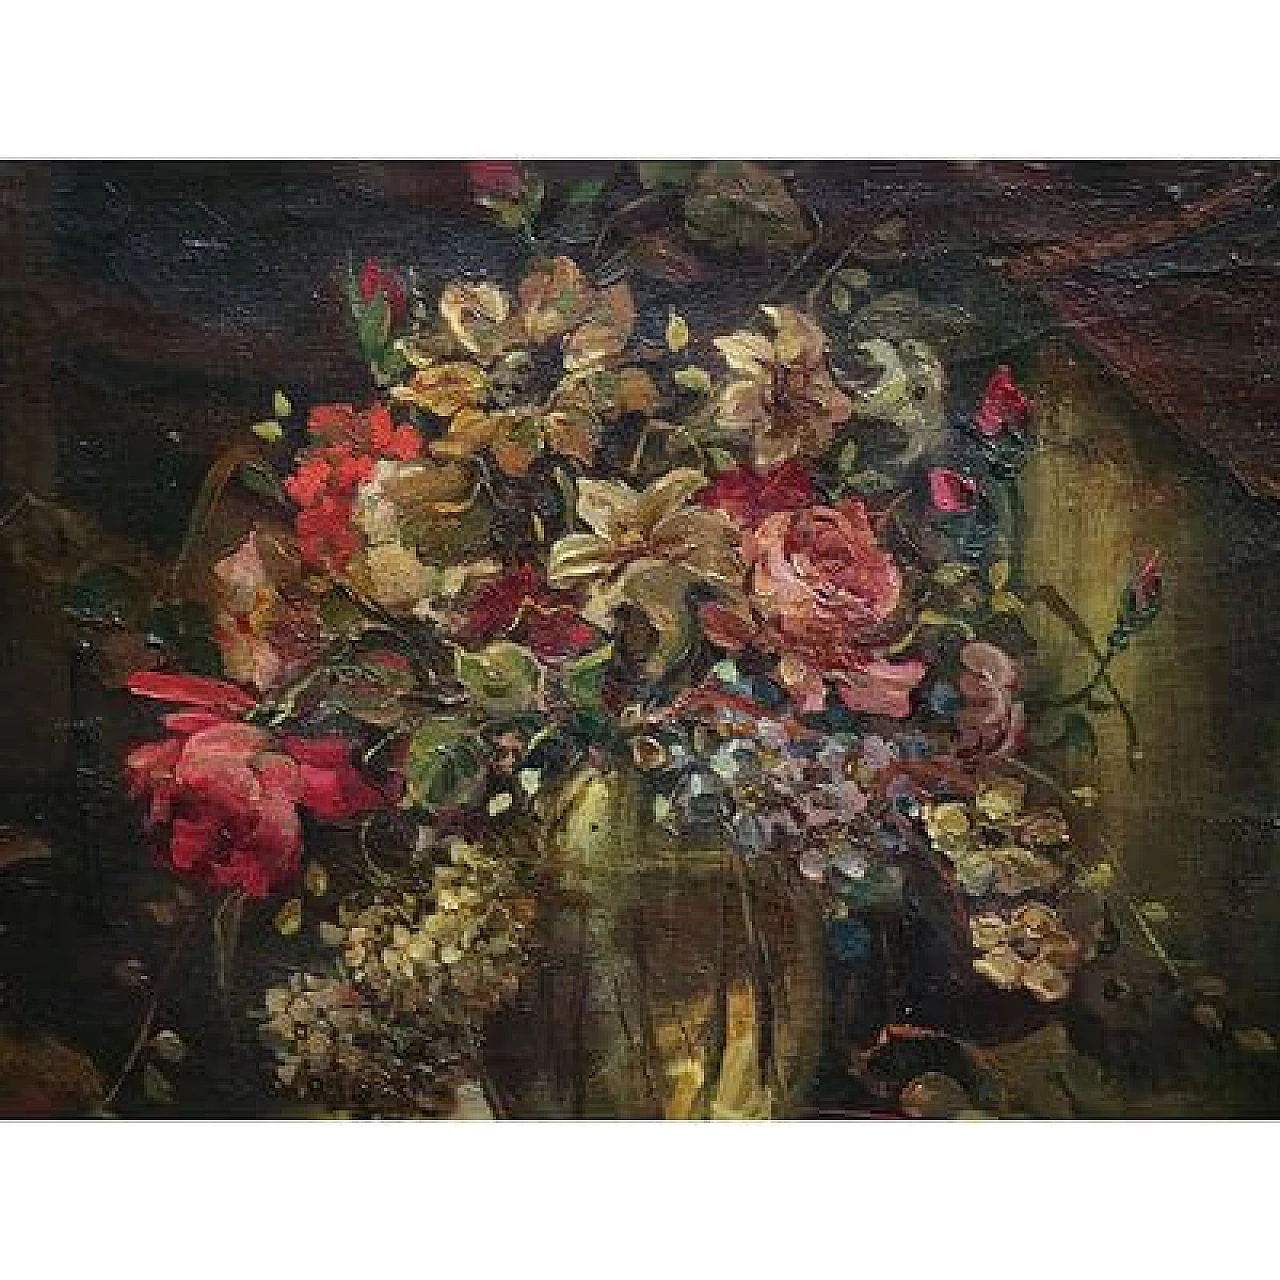 G. Zampogna, Still life with flowers and fruit, oil on canvas, 1952 3